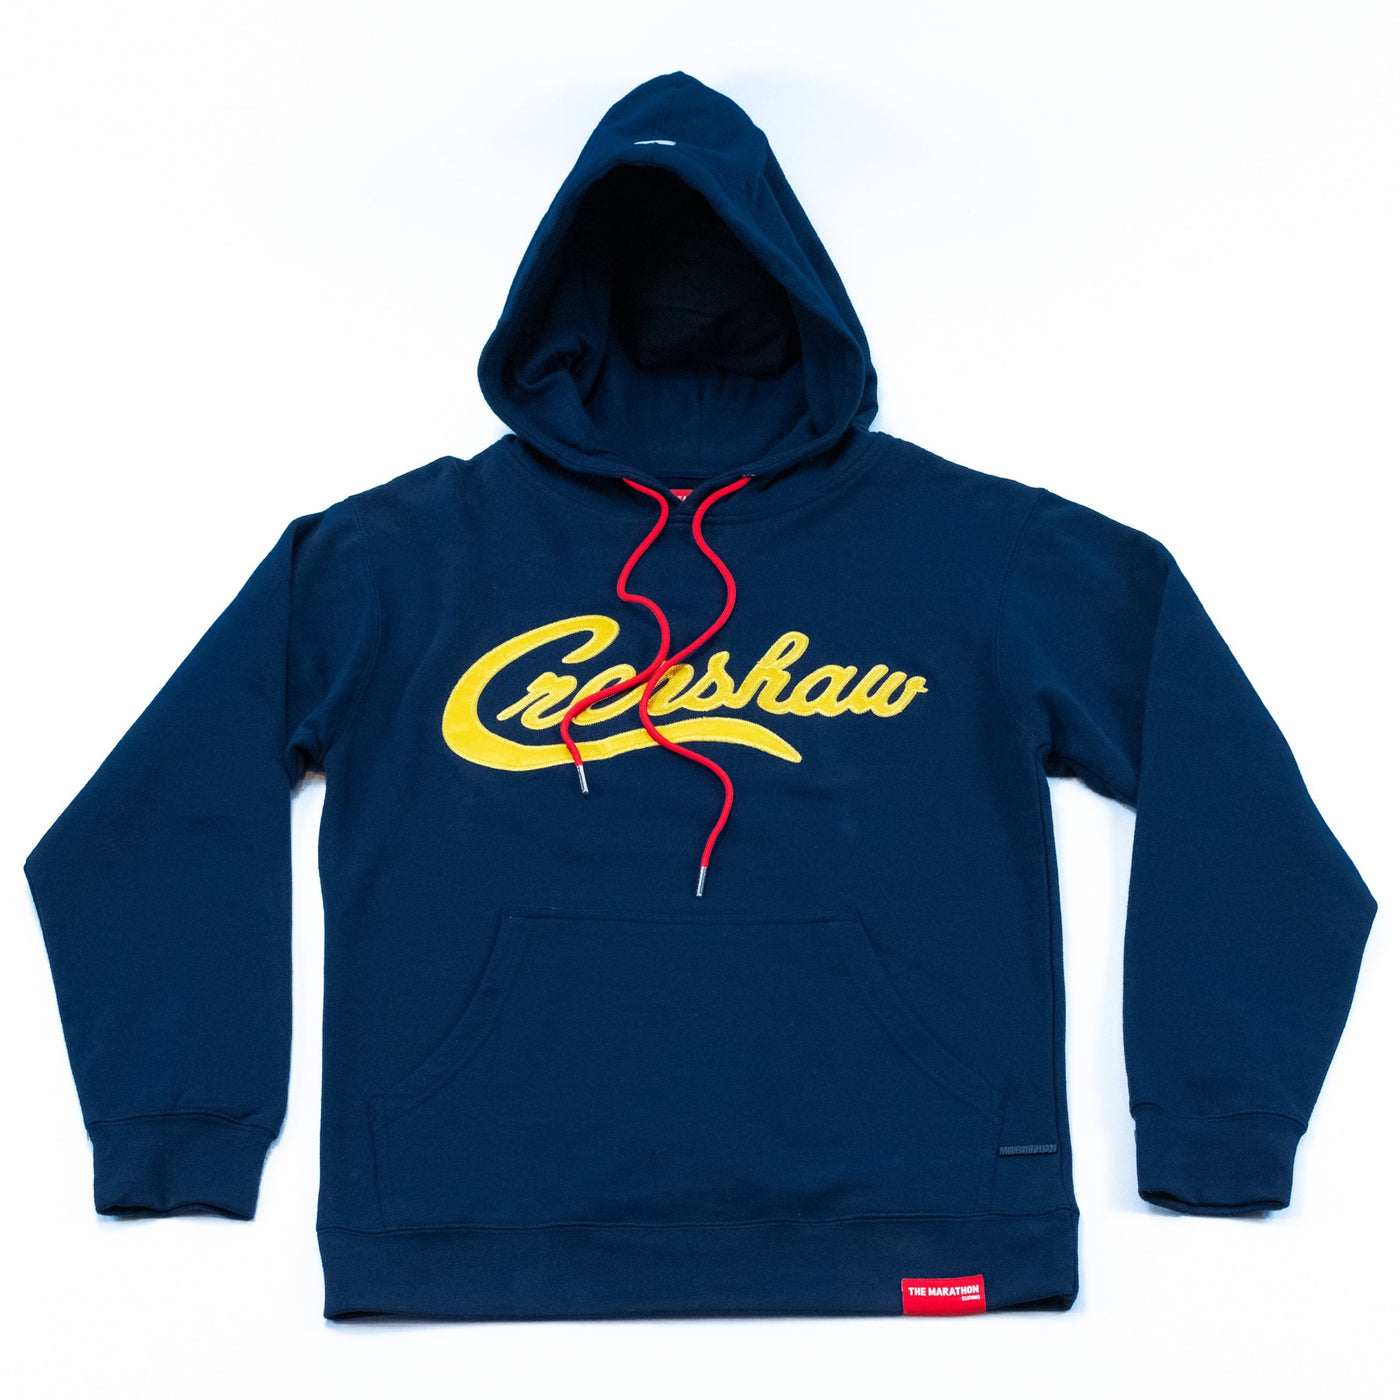 Limited Edition Crenshaw Hoodie - Navy/Yellow